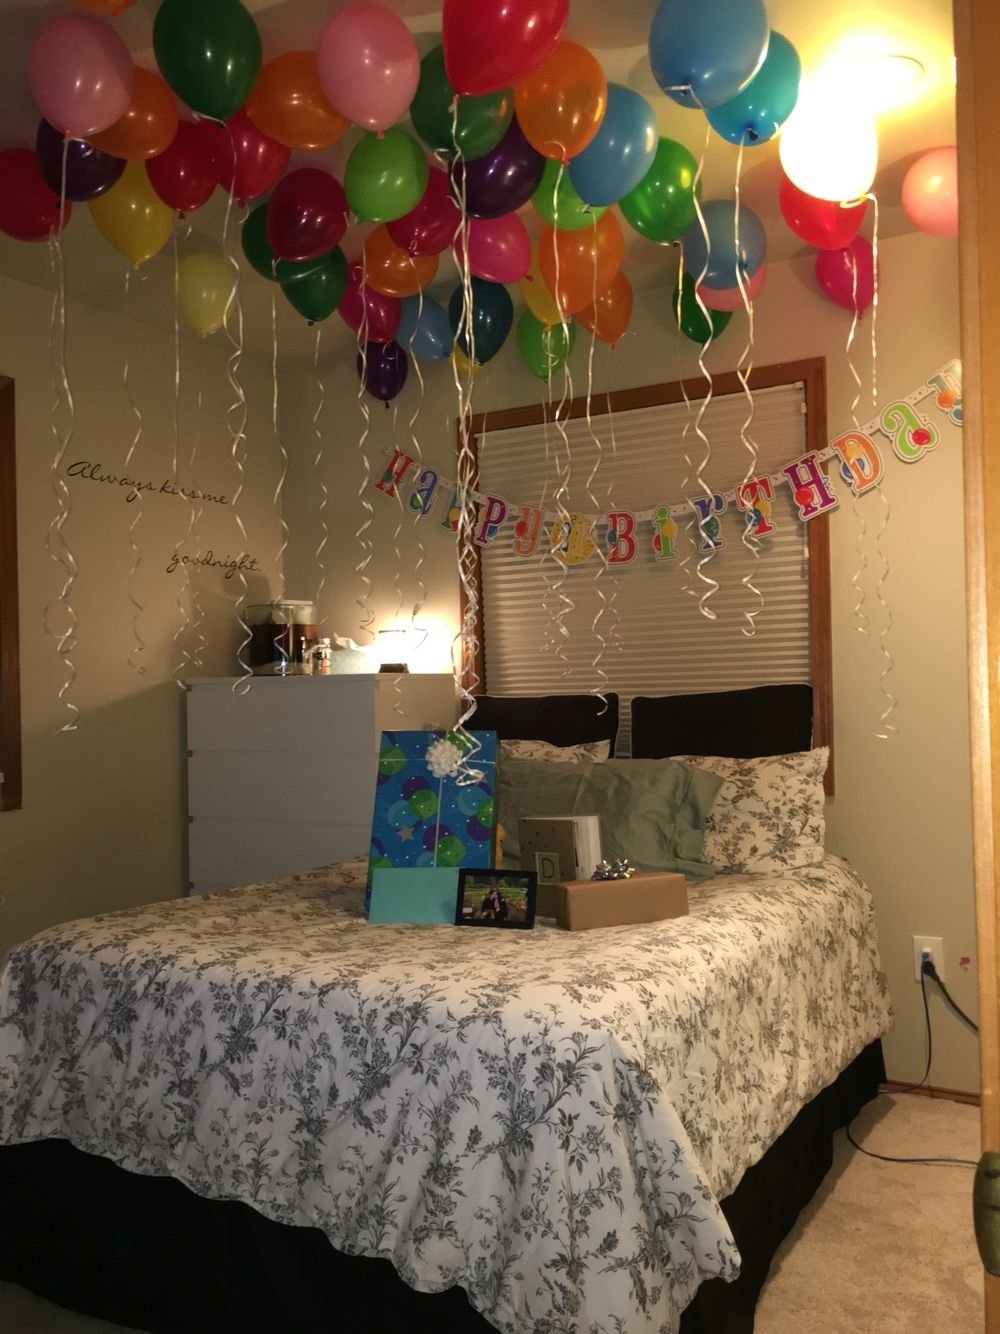 10 Fashionable Birthday Surprise Ideas For Girlfriend birthday surprise for boyfriend since im not 21 yet we couldnt go 7 2022